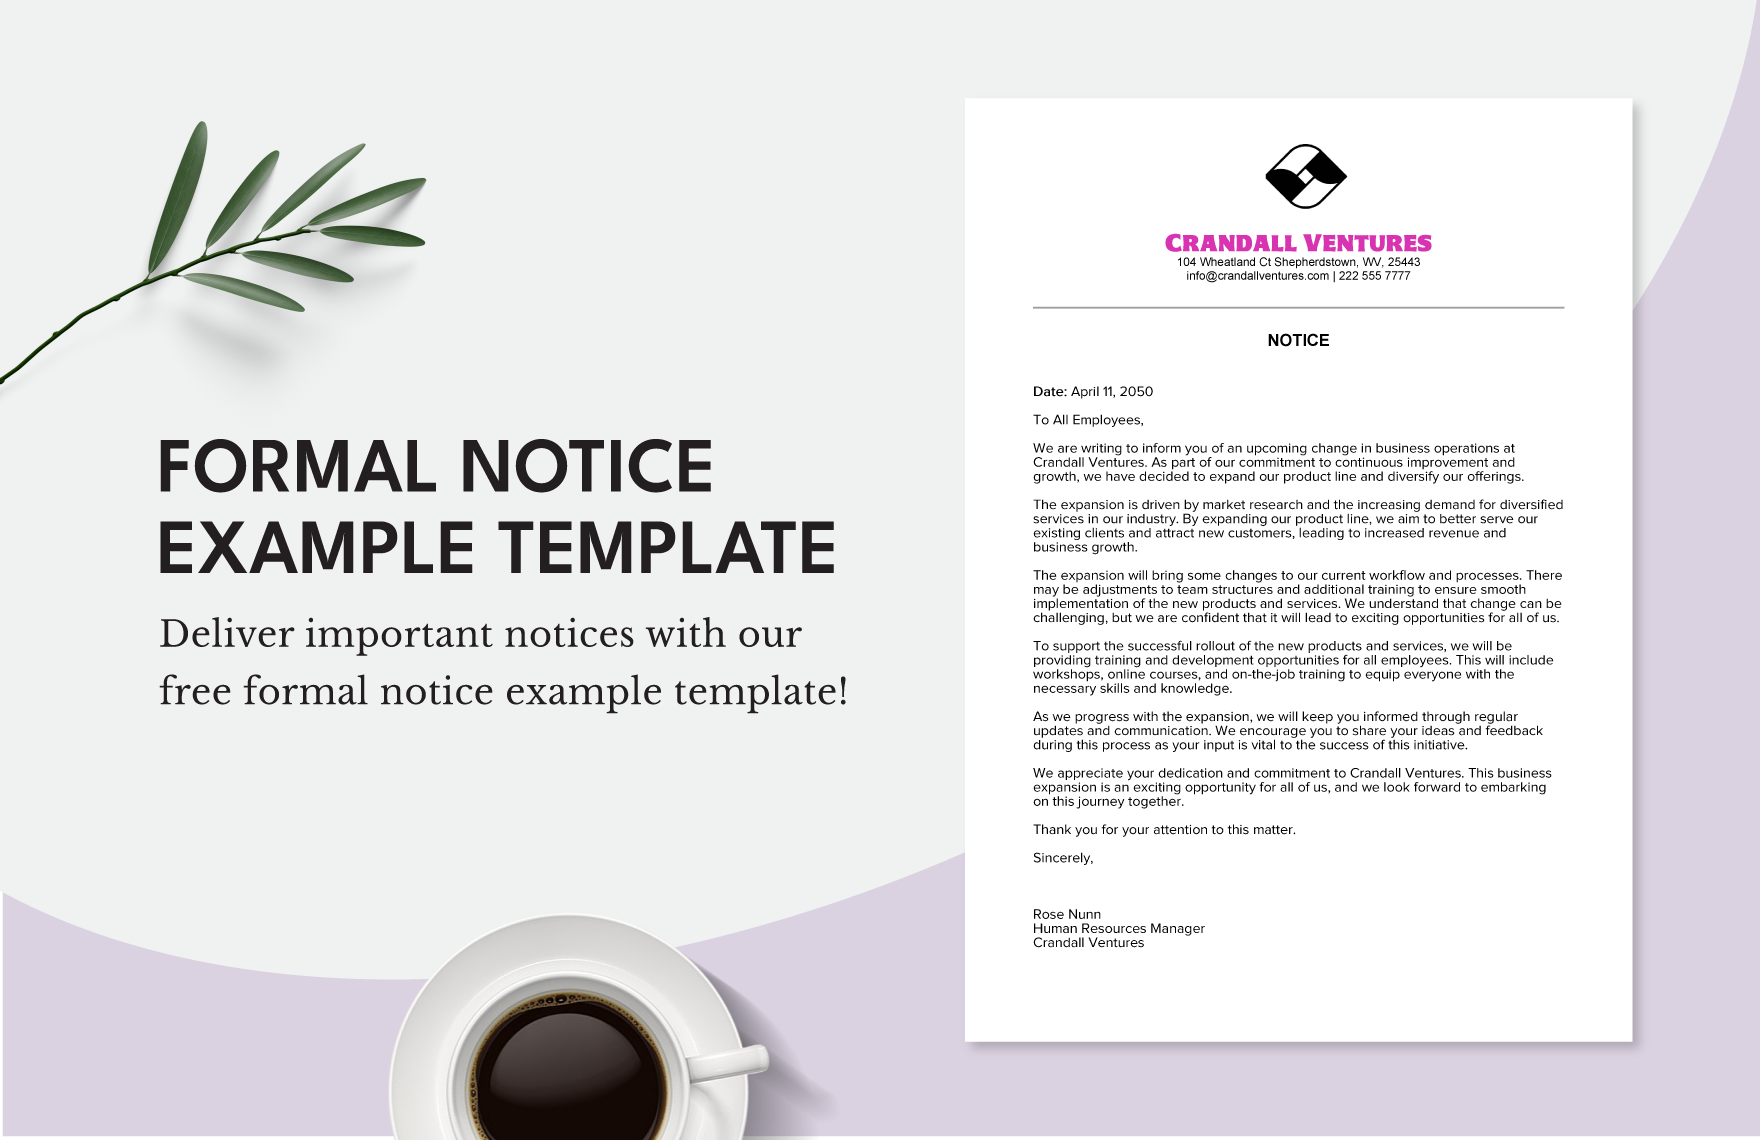 Formal Notice Example Template